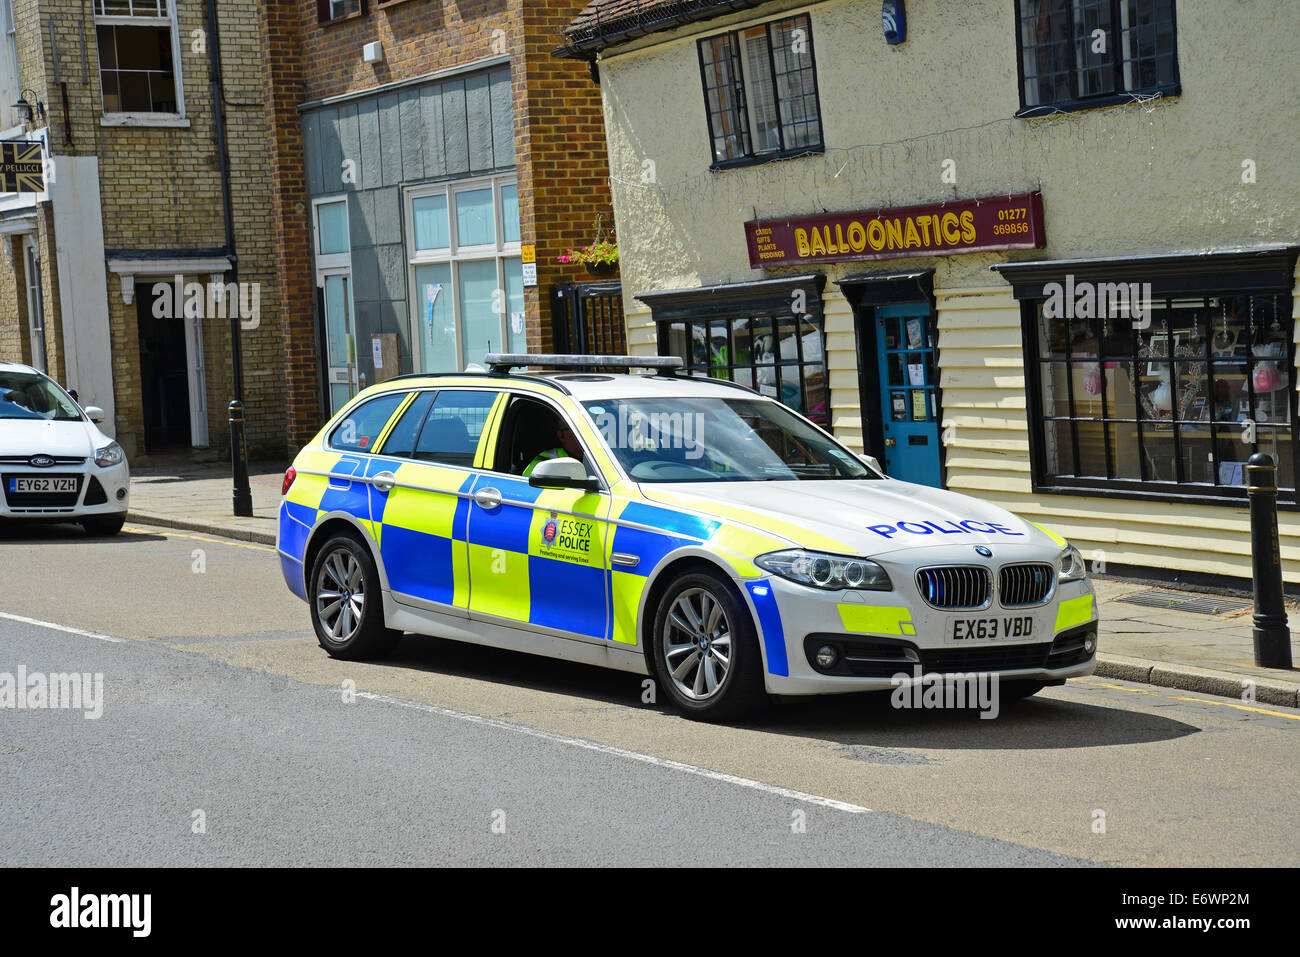 Police car on call, High Street, Chipping Ongar, Essex, England, United Kingdom Stock Photo